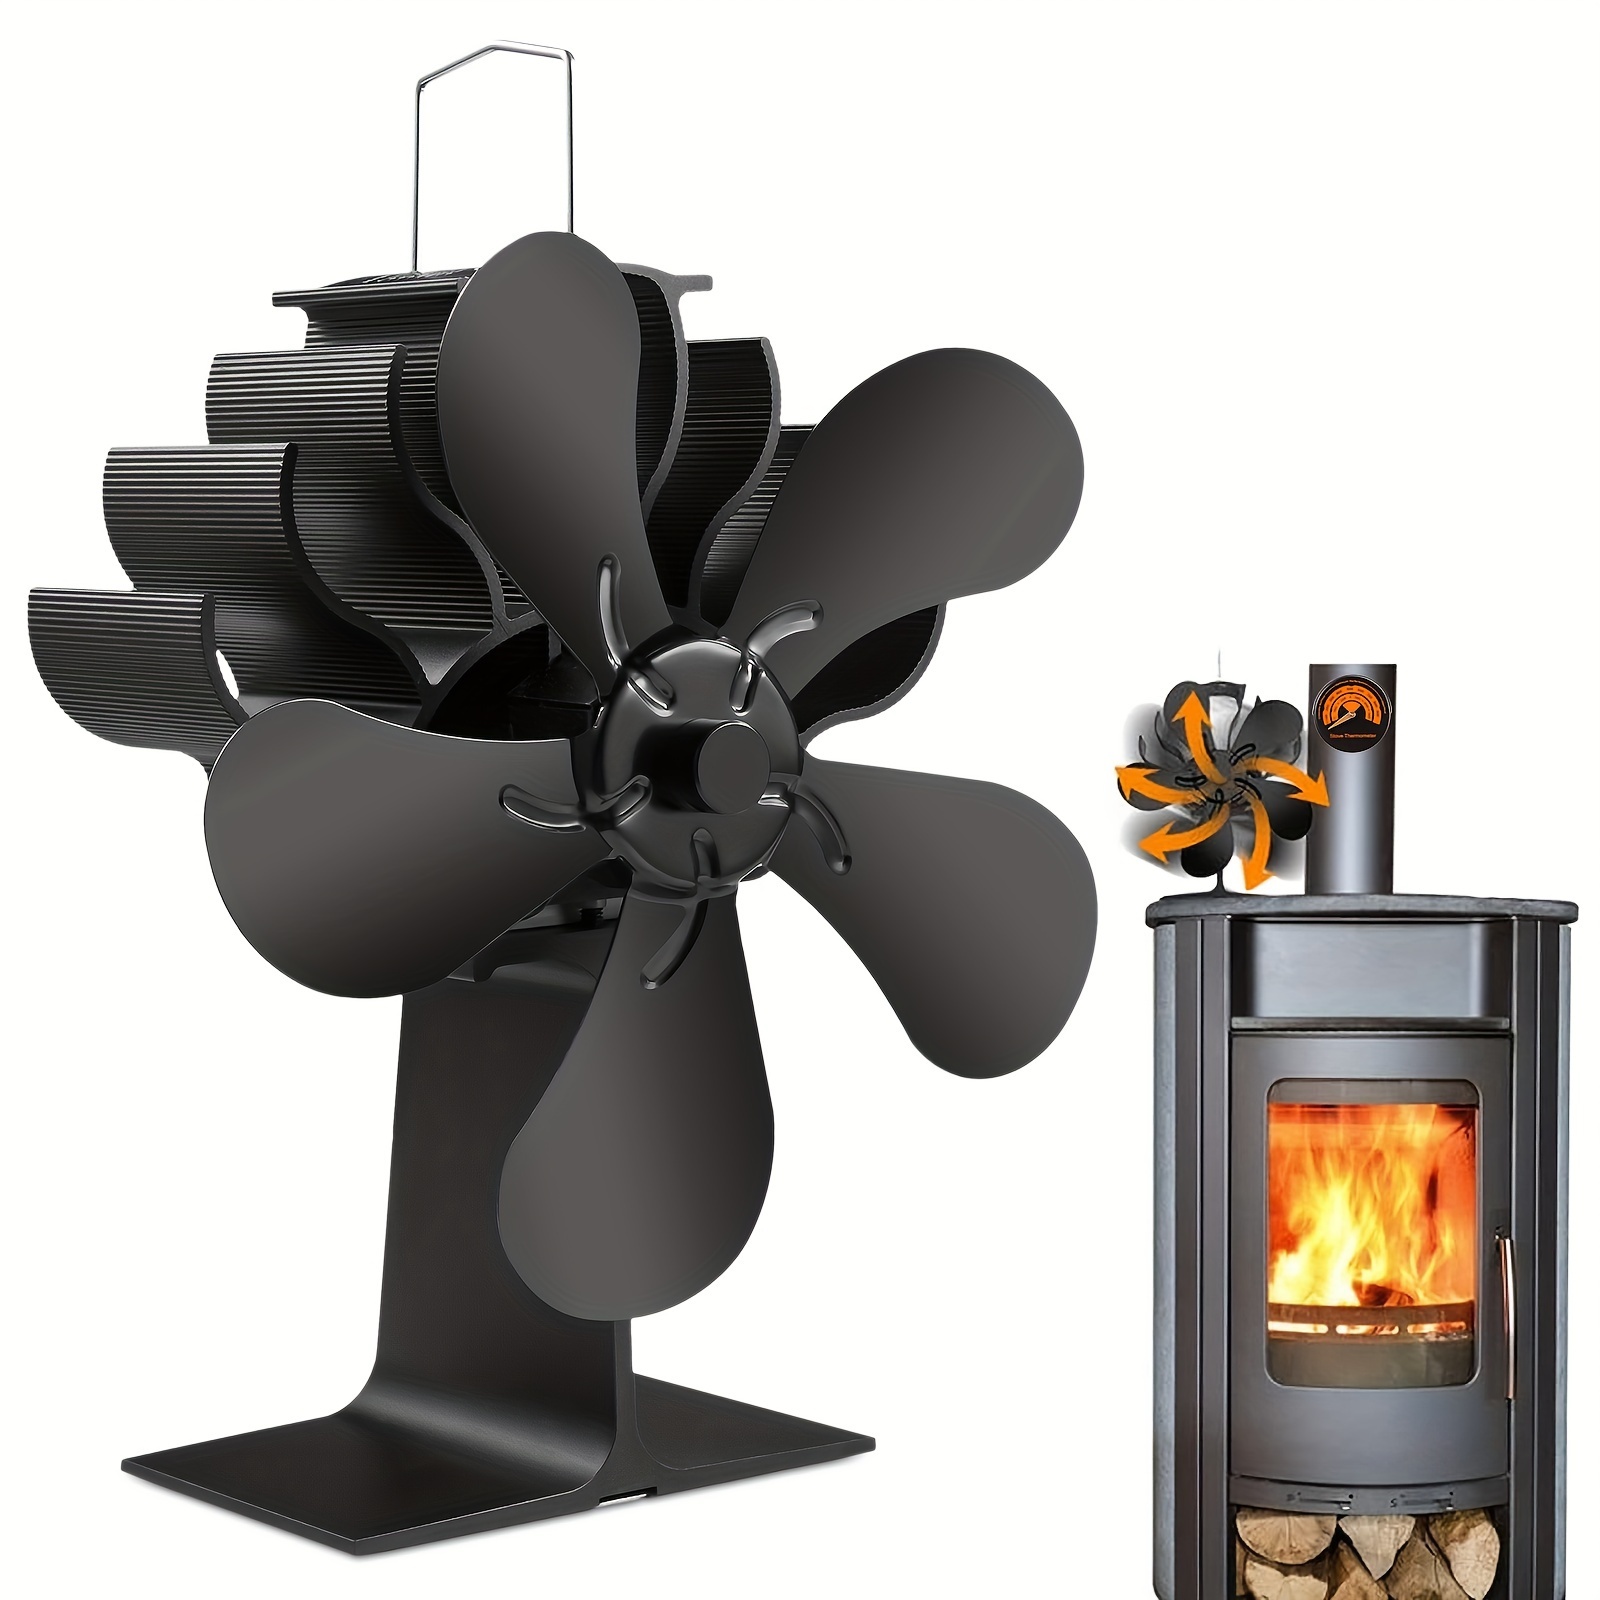 Hanaoyo Wood Stove Fan, 6 Blades Wood Stove Fan Heat Powered, Fireplace Fan  with Magnetic Thermometer, Wood Stove Accessories, Non Electric Fan for